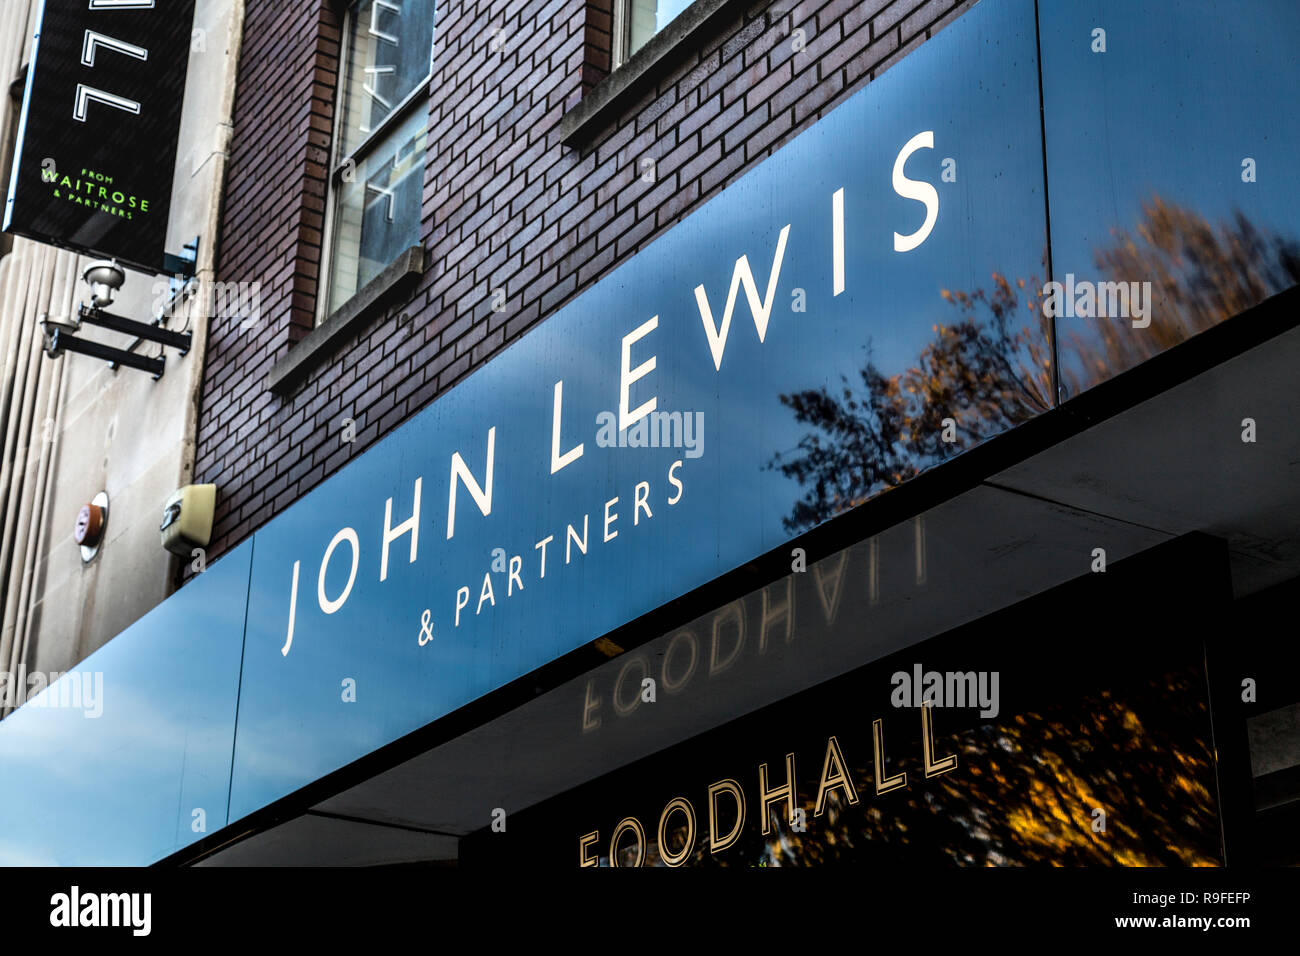 Logo Sign On The Facade Of The John Lewis Partners Oxford Street Department Store After Rebranding London Uk R9FEFP 